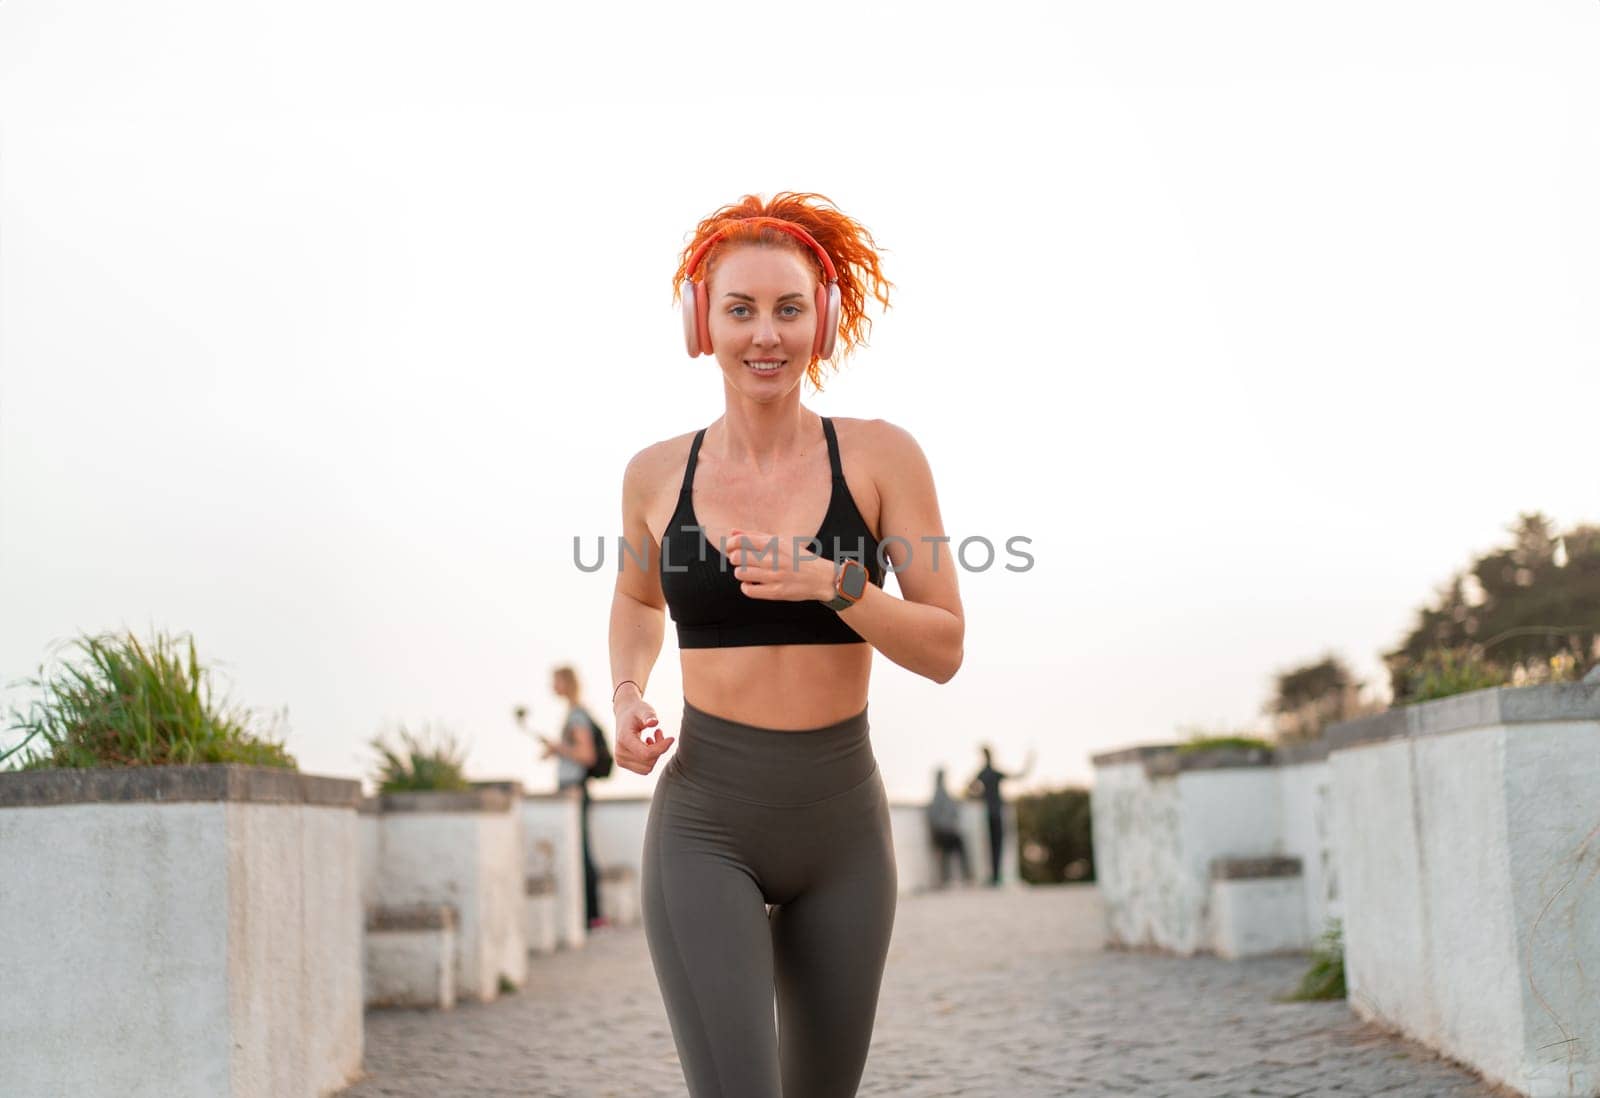 Fit woman listening to music via headphones while jogging on footpath. Smiling fit jogger runner in sportswear exercising outdoors. Young active lady running under clear sky. Healthy lifestyle.